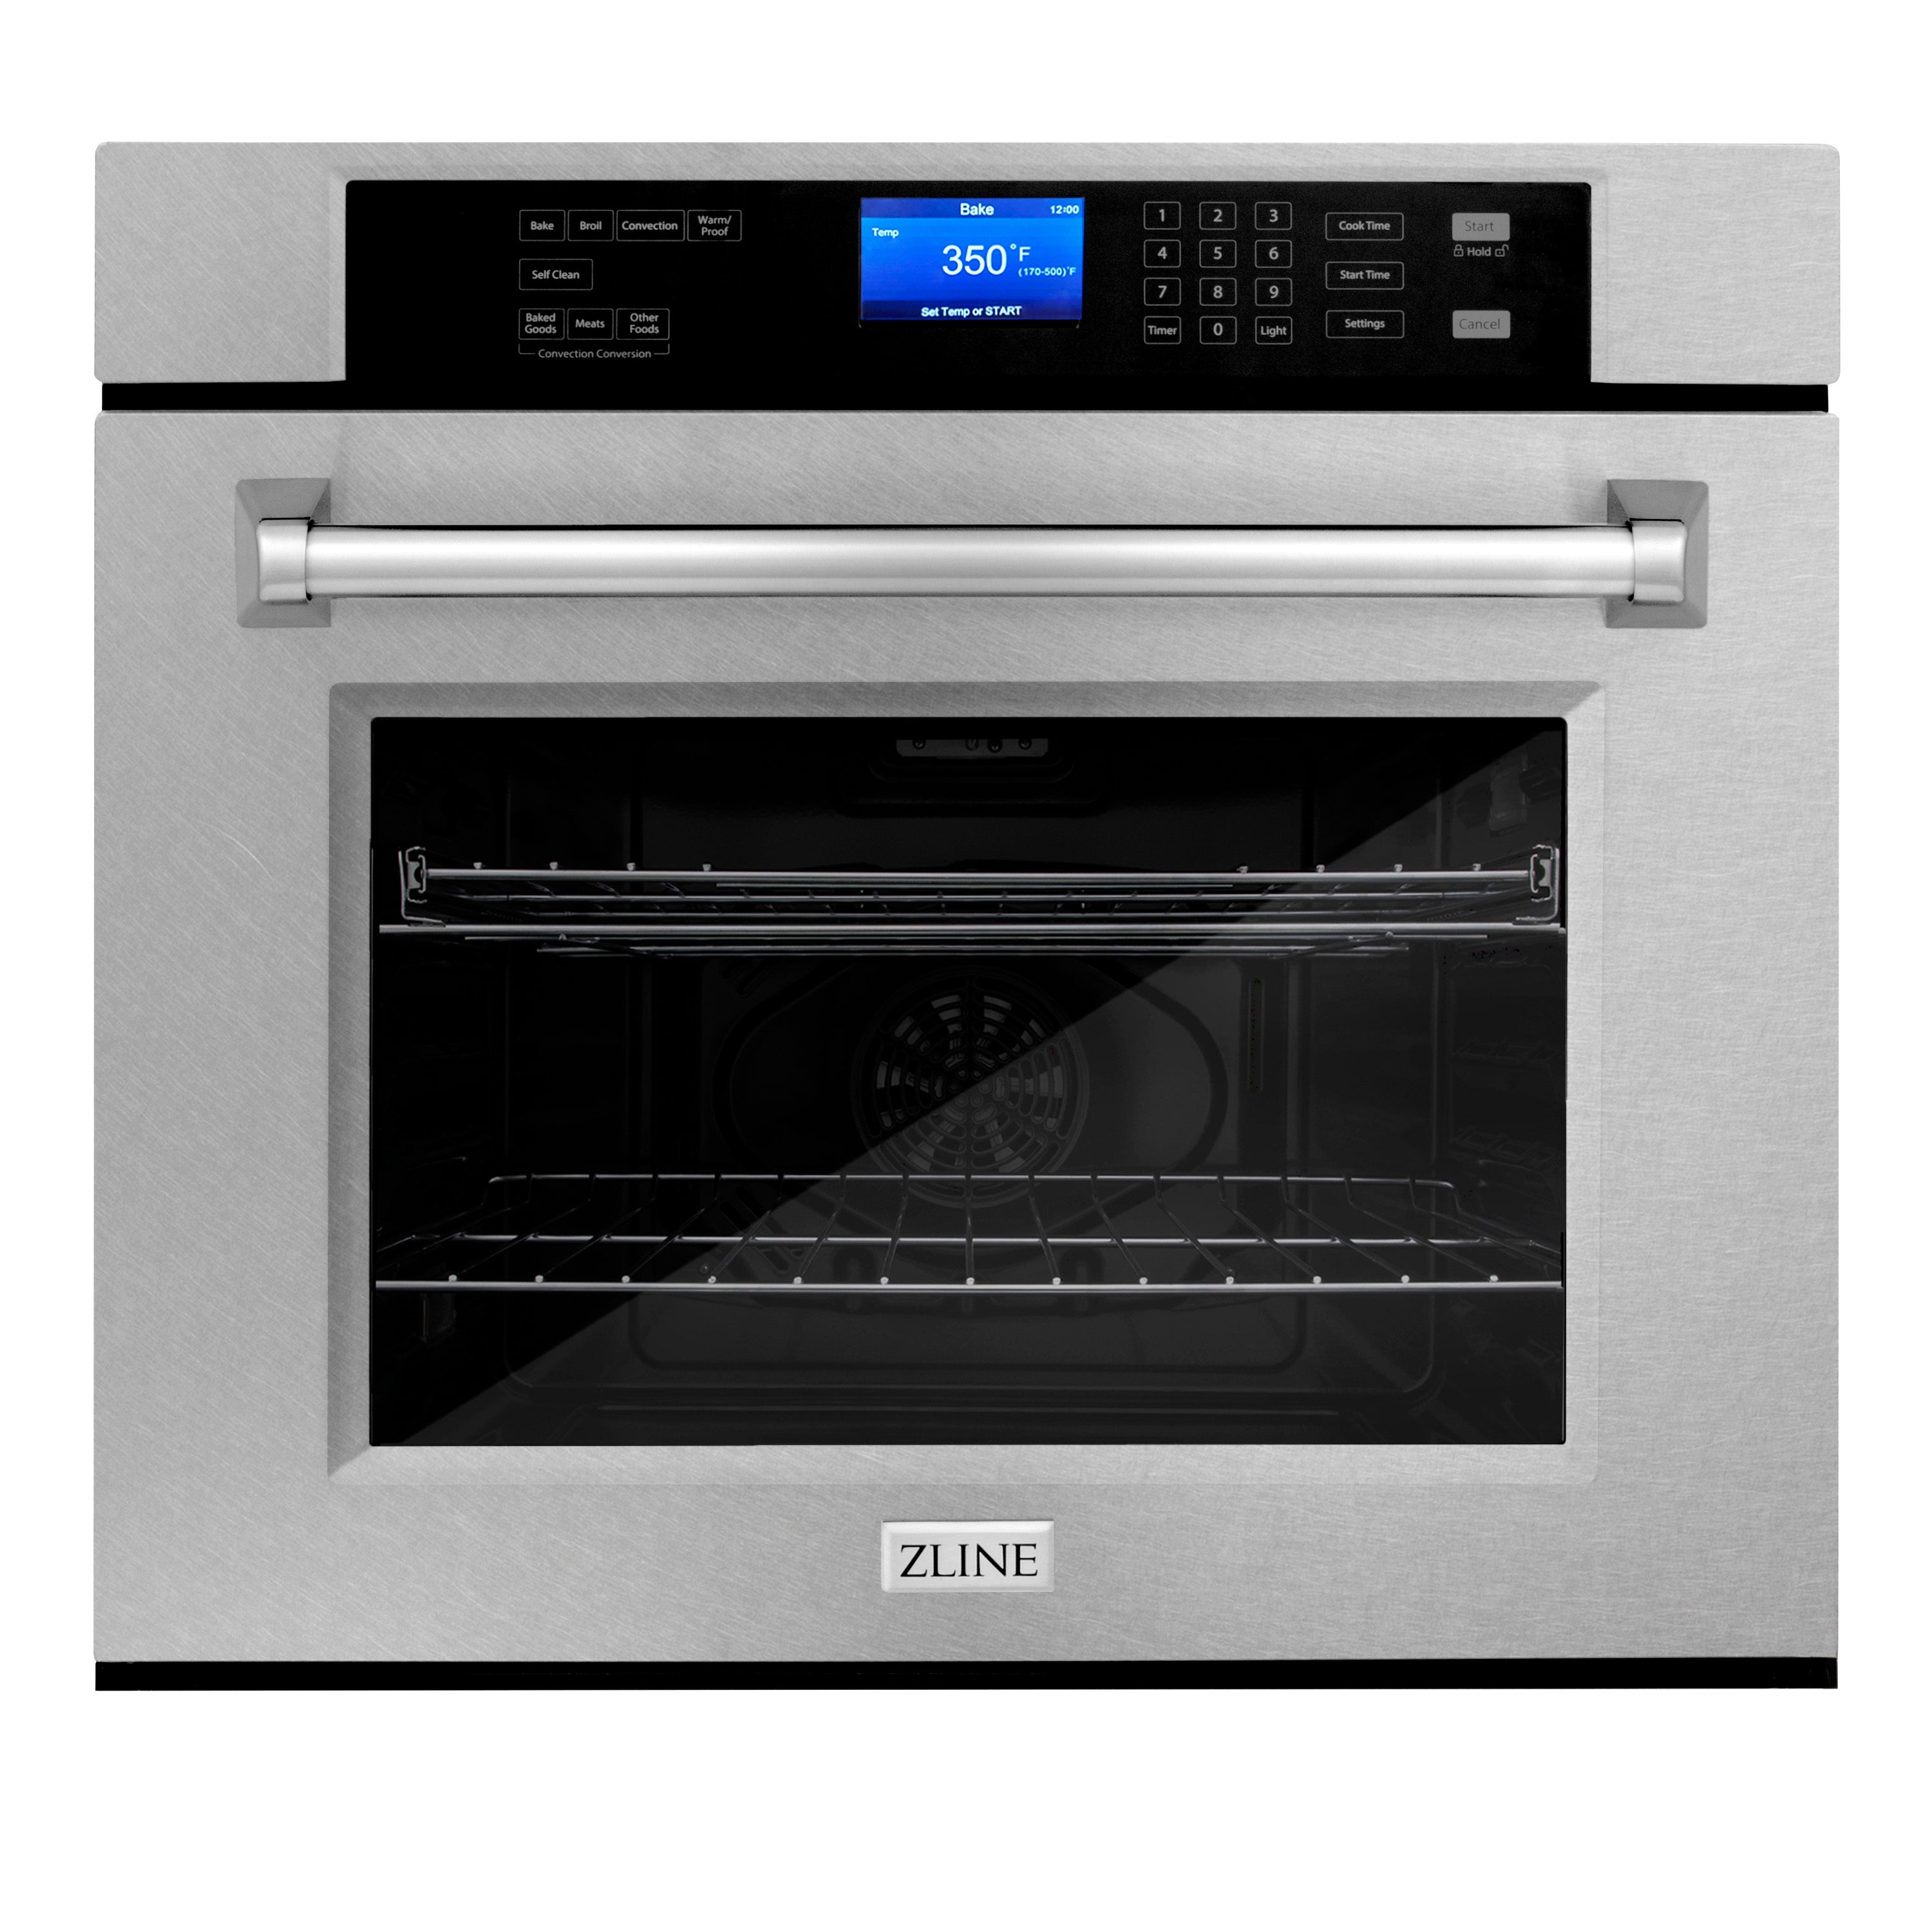 ZLINE 30" Professional Single Wall Oven with Self Clean and True Convection in Fingerprint Resistant Stainless Steel (AWSS-30)